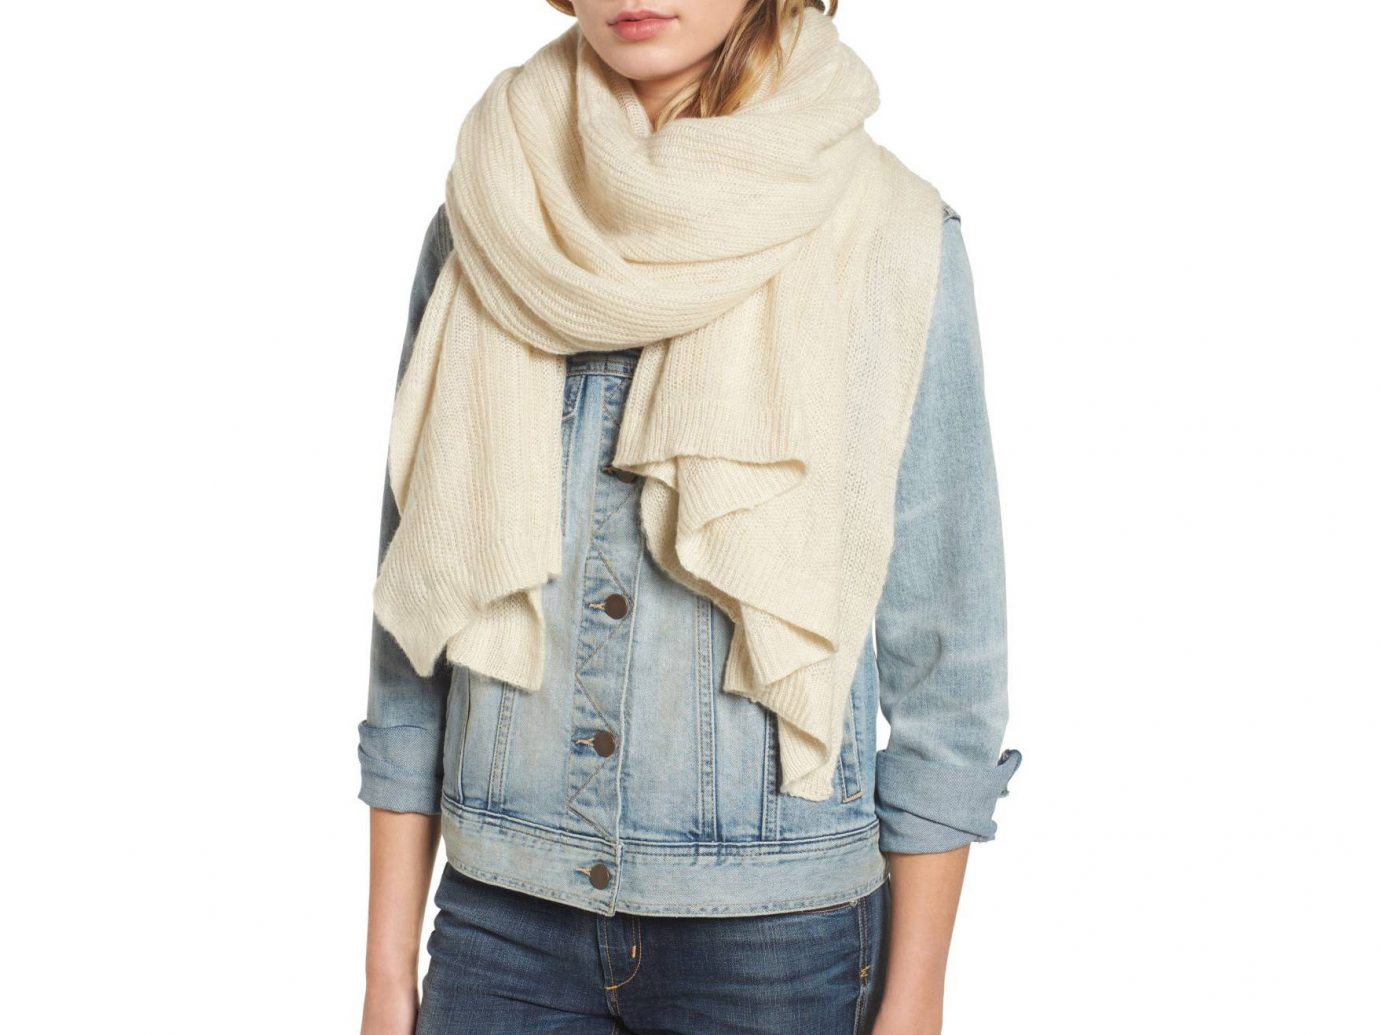 Travel Shop person clothing wearing stole scarf jacket beige neck posing